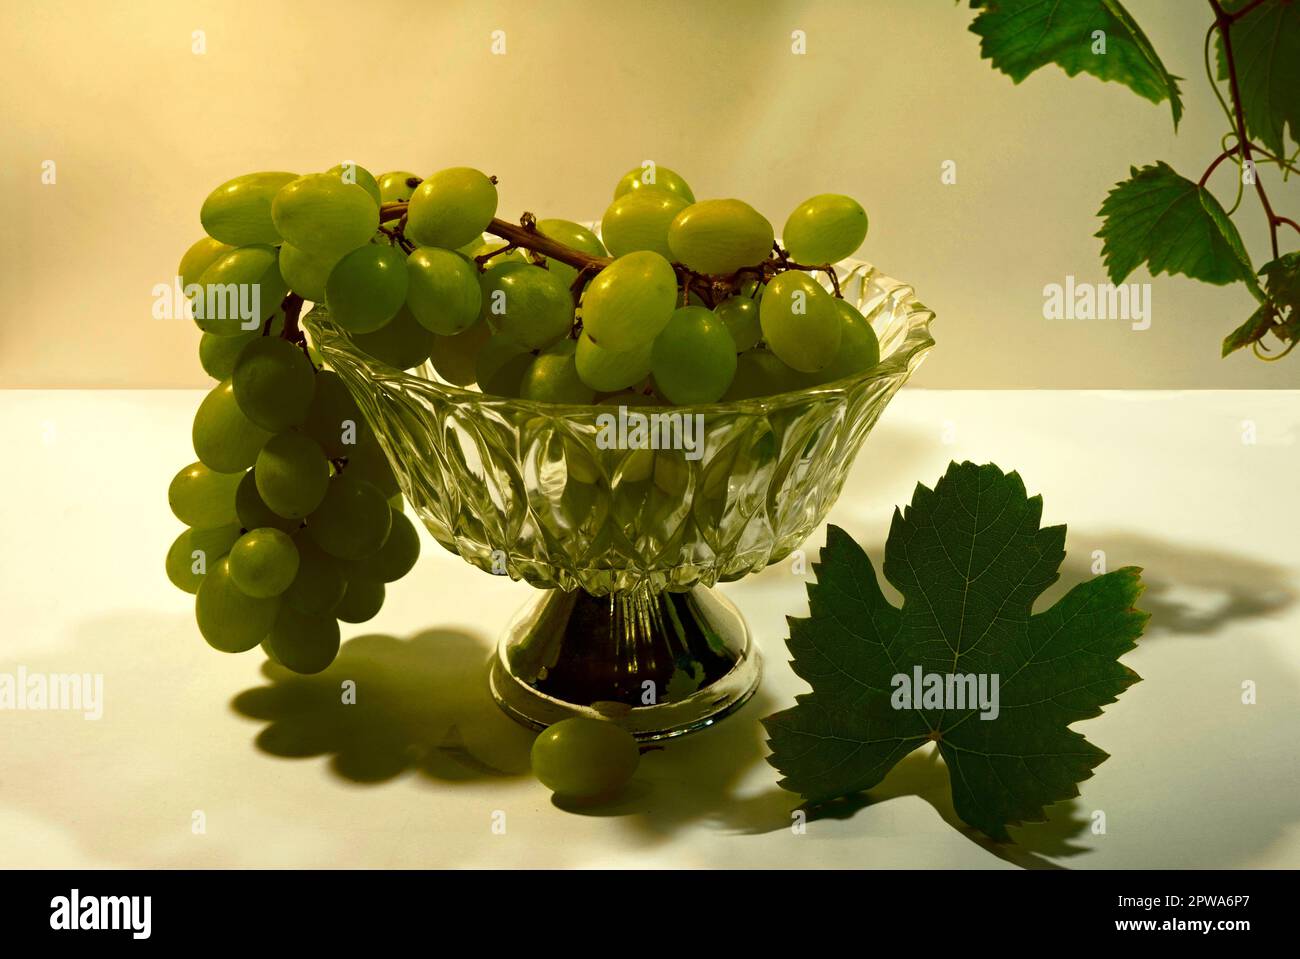 https://c8.alamy.com/comp/2PWA6P7/a-bunch-of-white-grapes-in-a-glass-bowl-with-a-silver-base-a-grape-vine-and-leaf-serve-as-decoration-2PWA6P7.jpg